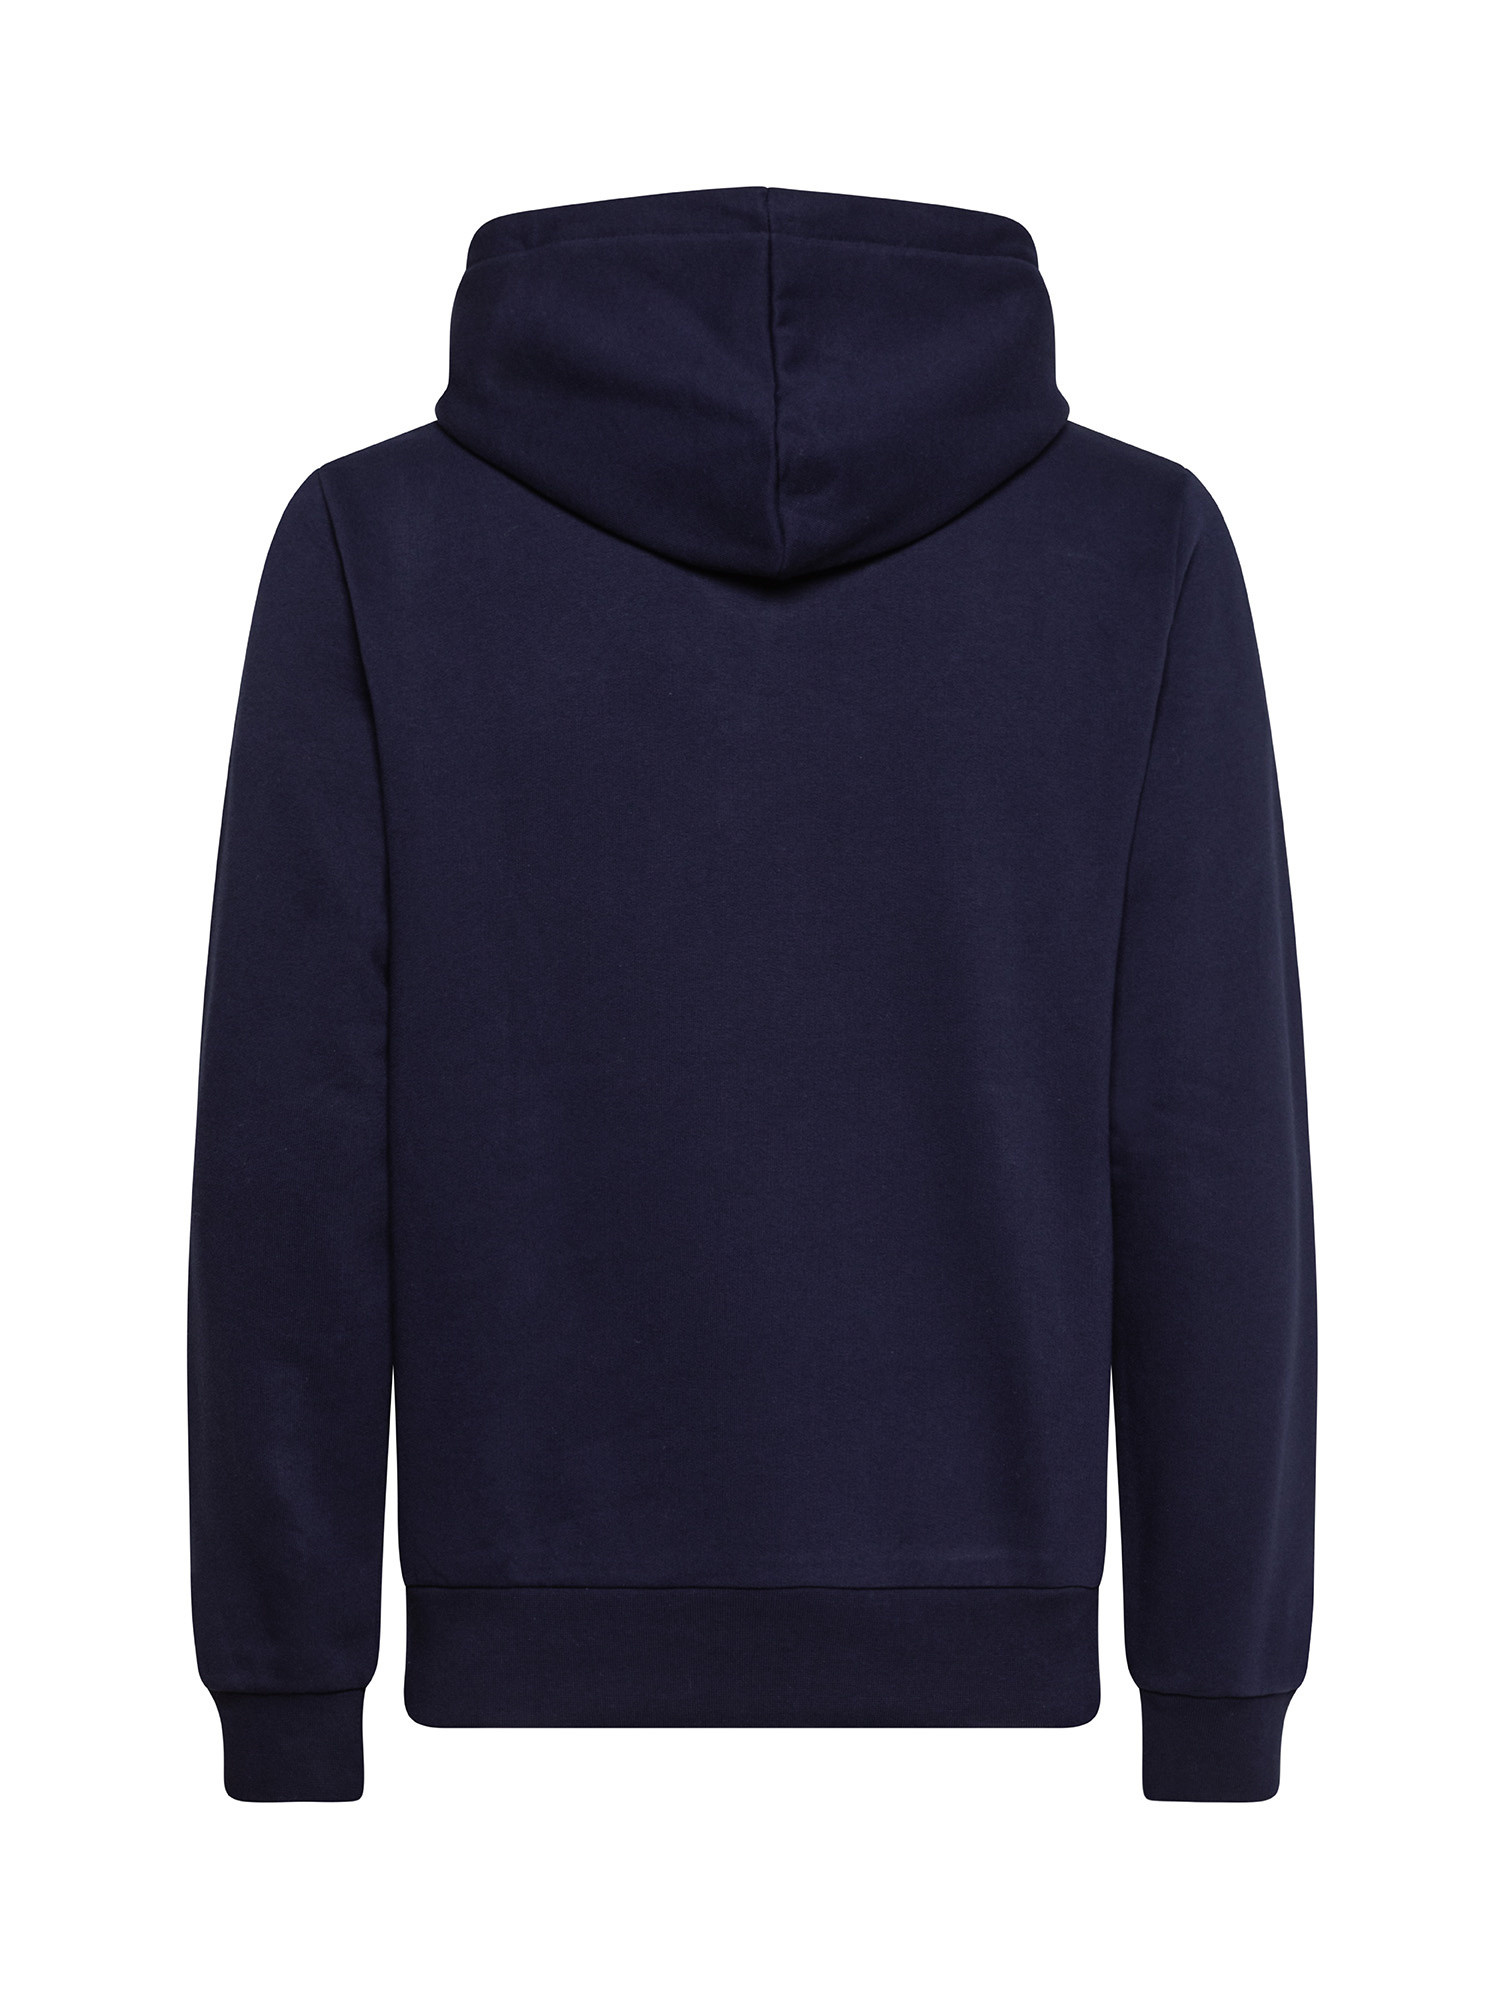 Lacoste - Organic cotton hoodie, Blue, large image number 1